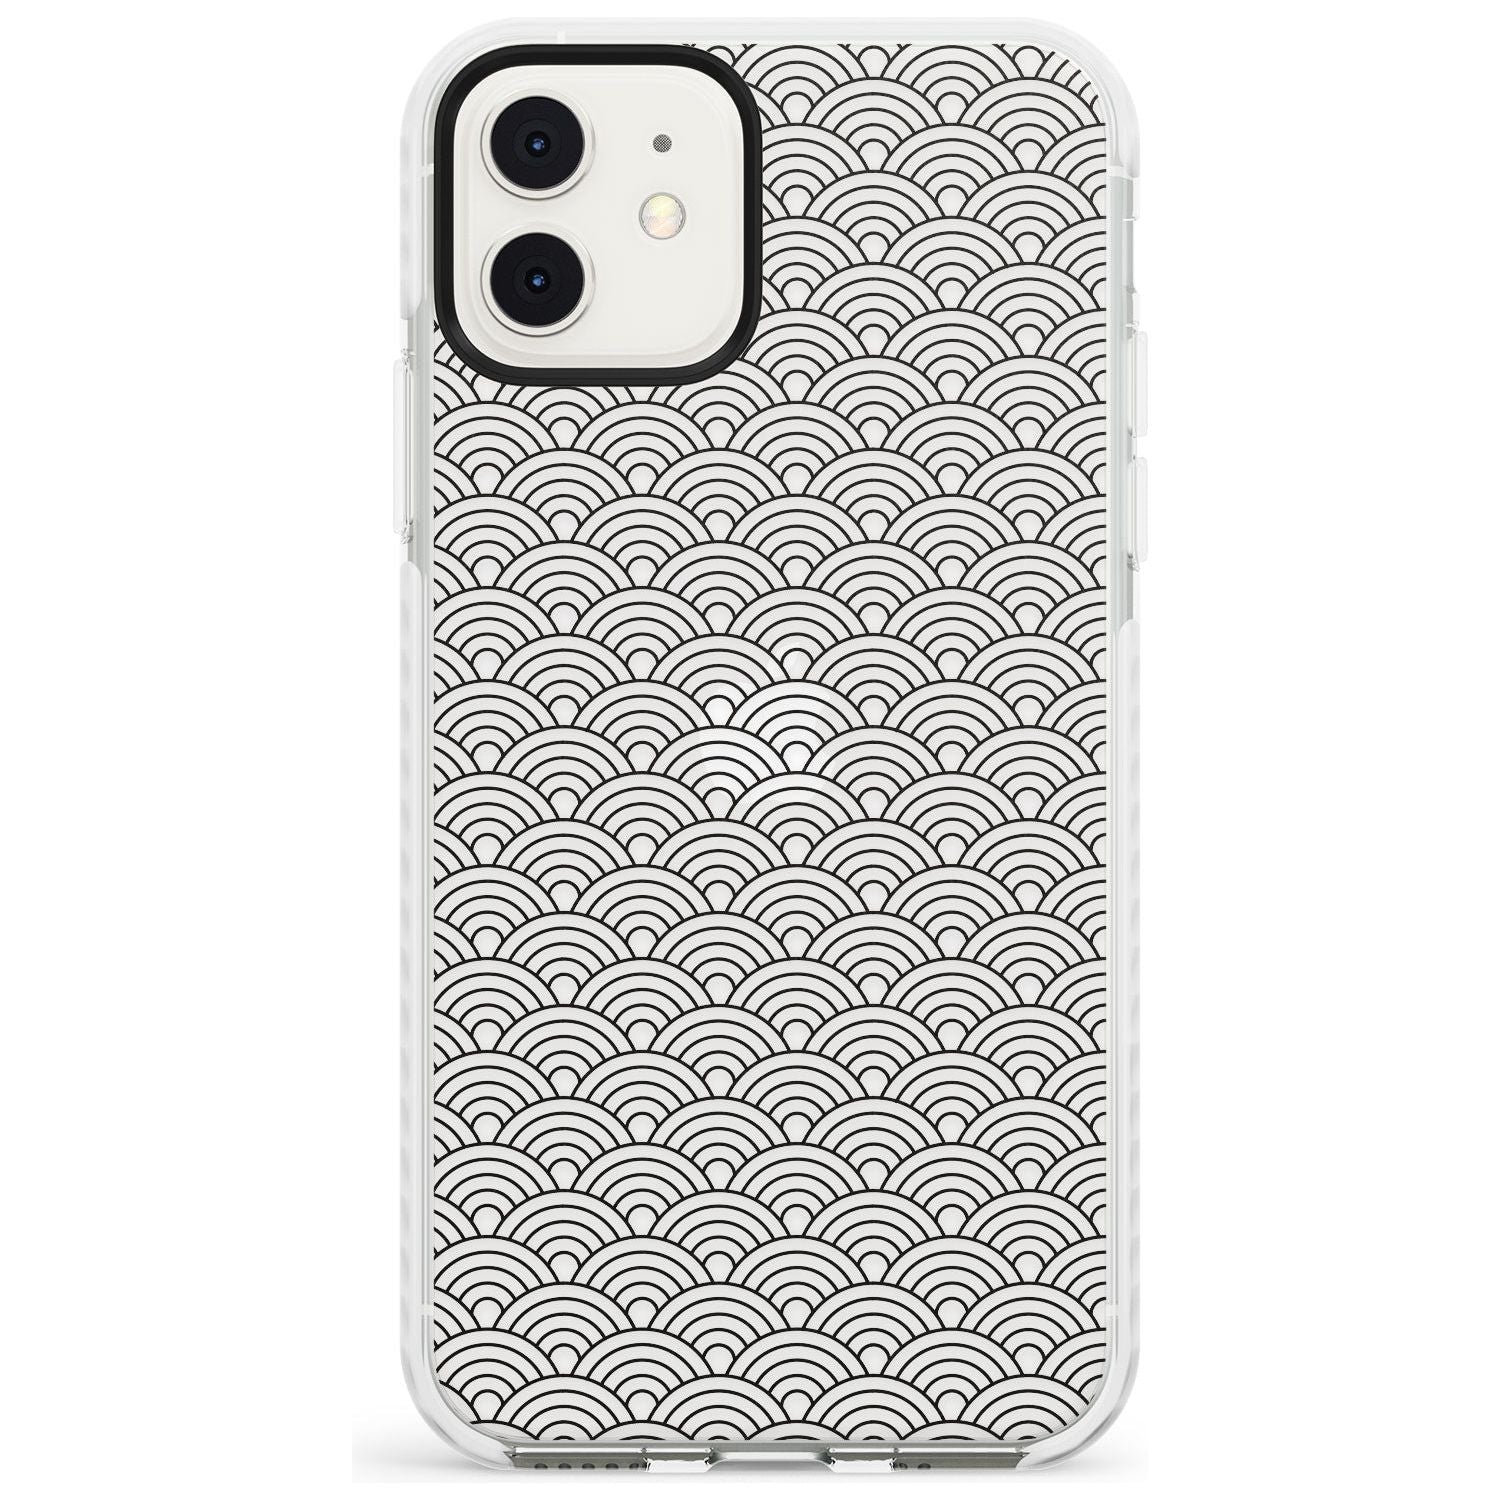 Abstract Lines: Scalloped Pattern Slim TPU Phone Case for iPhone 11